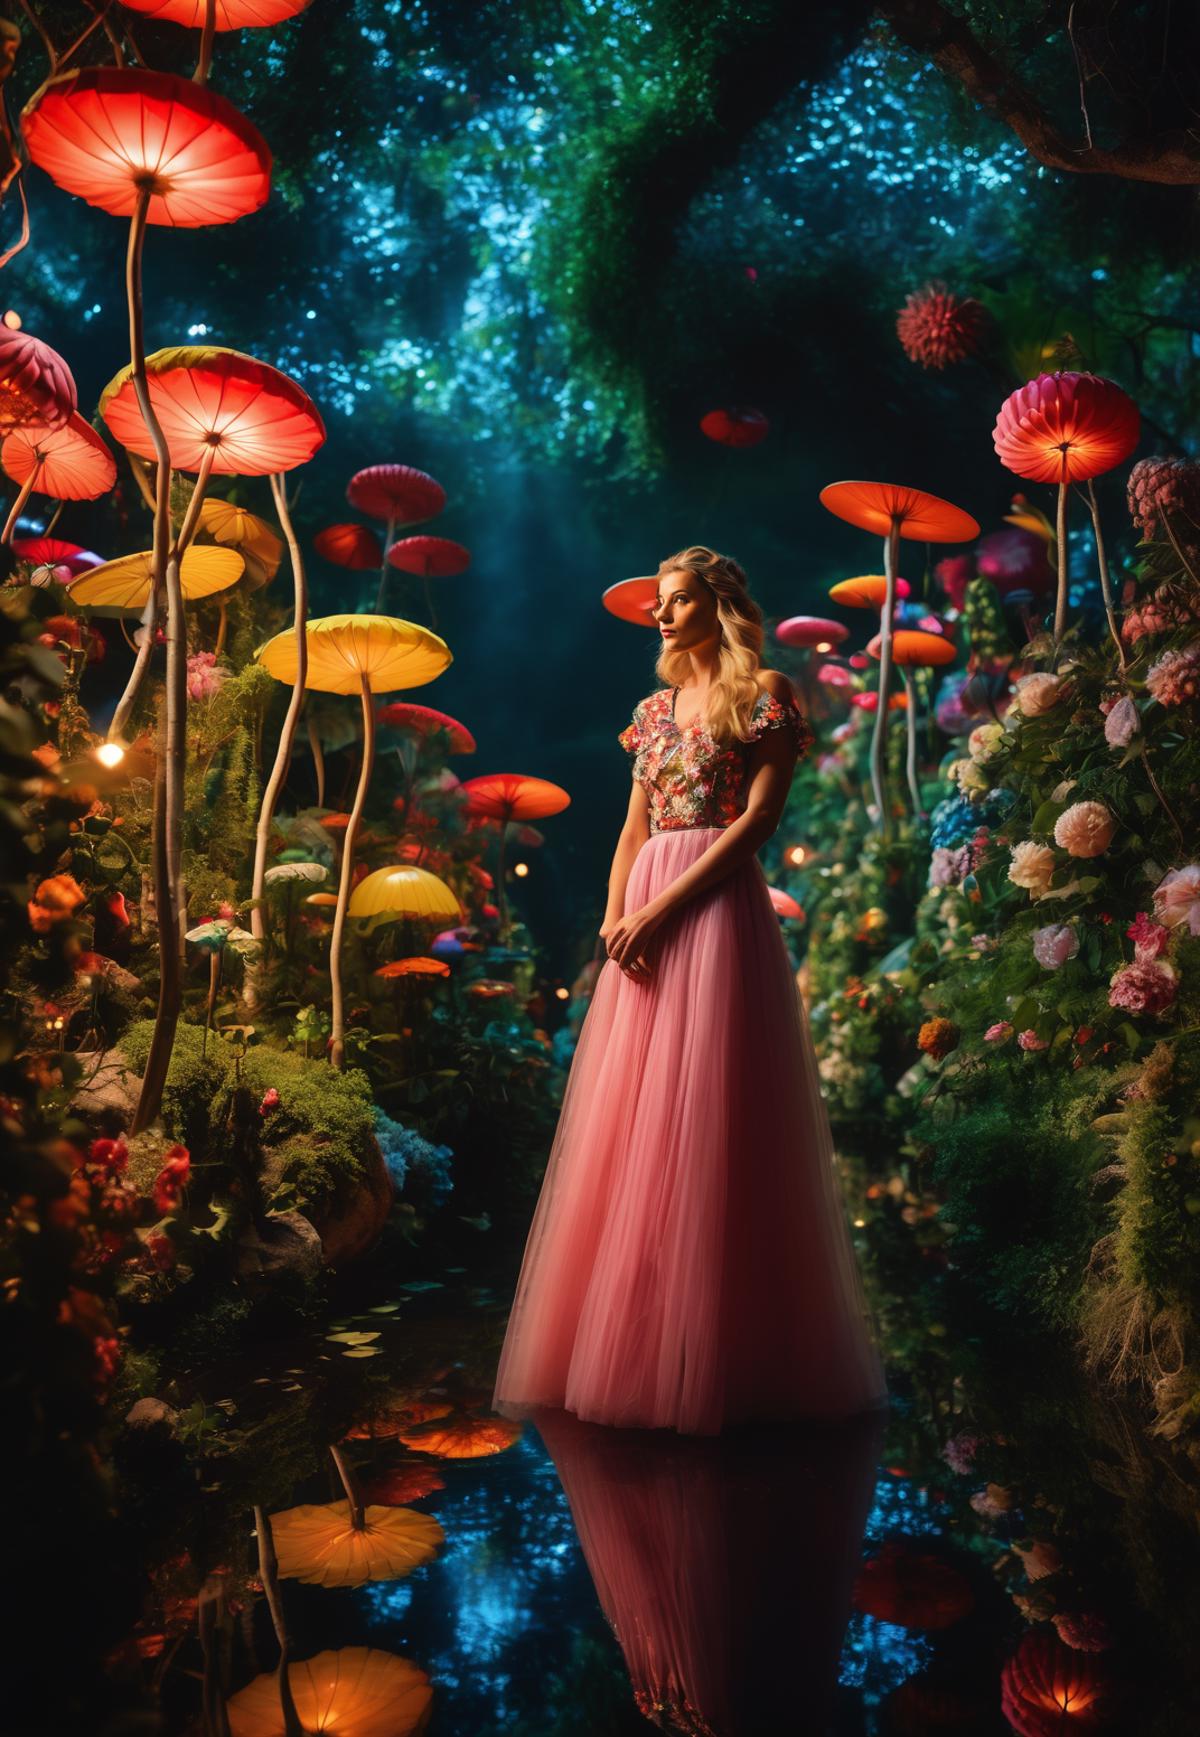 A woman in a pink dress standing in a mushroom forest.